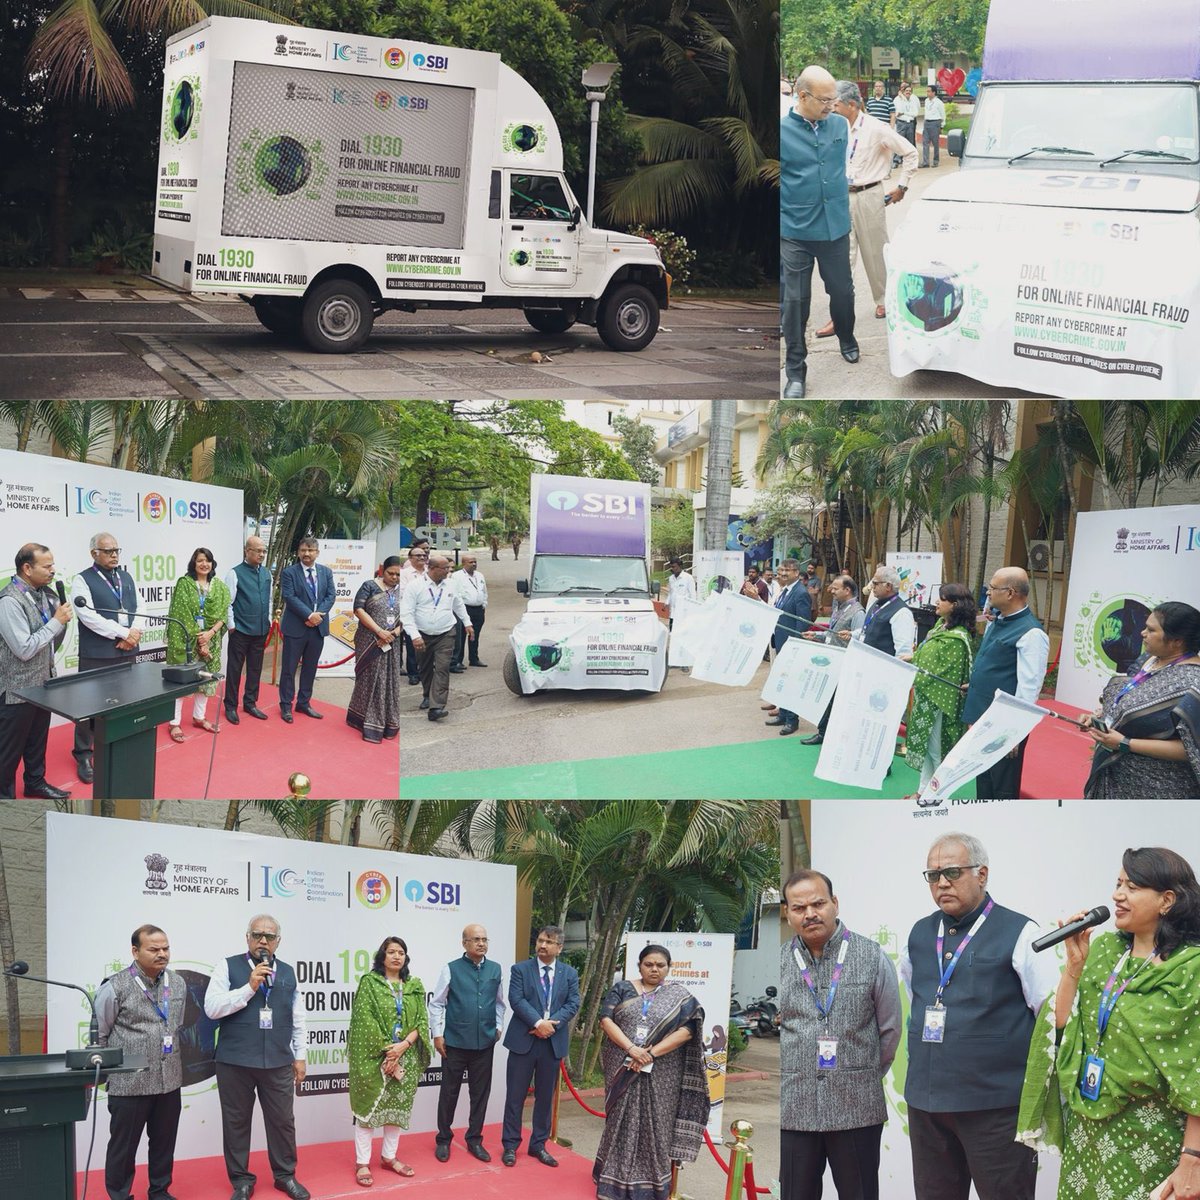 As part of the Cyber Crime awareness initiative, a Mobile Awareness Van was flagged off today by SBI, Hyderabad Circle. This van will be moving around the State of Telangana by making announcements in vernacular and digital display of posters for alerting the public on cybercrime